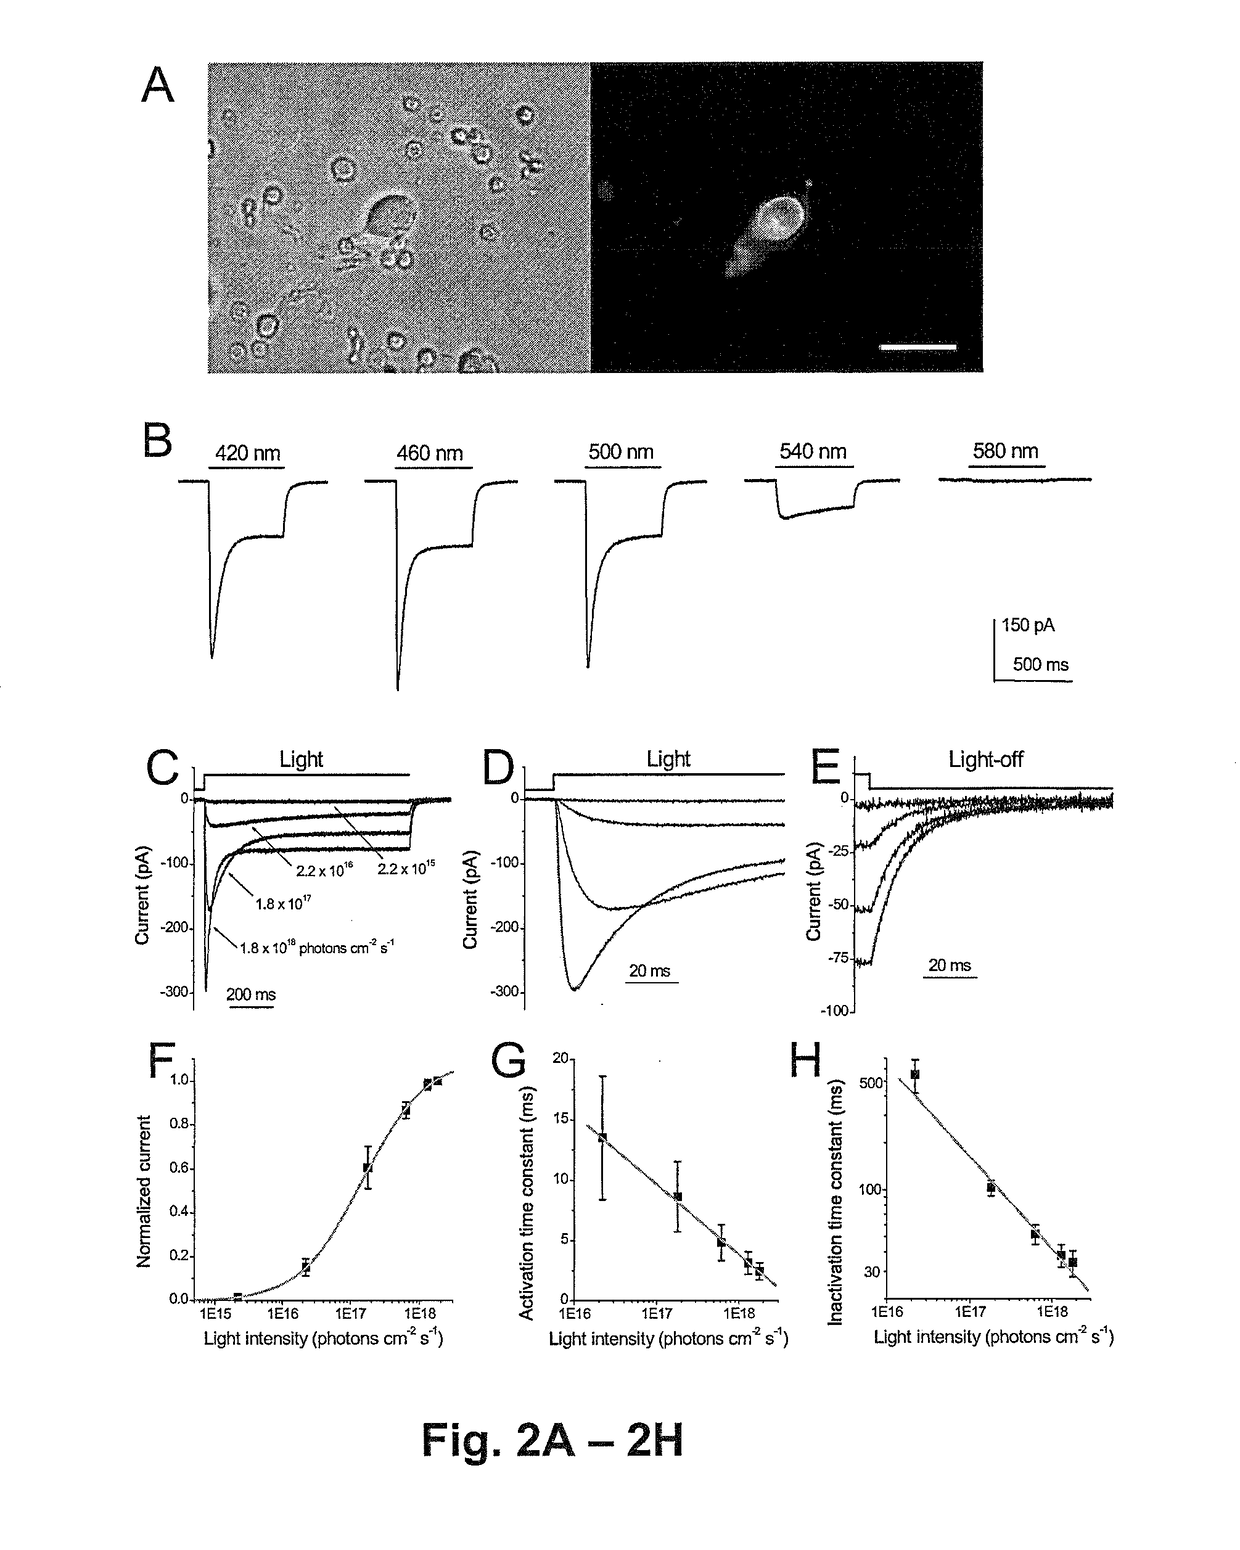 Restoration of visual responses by in vivo delivery of rhodopsin nucleic acids